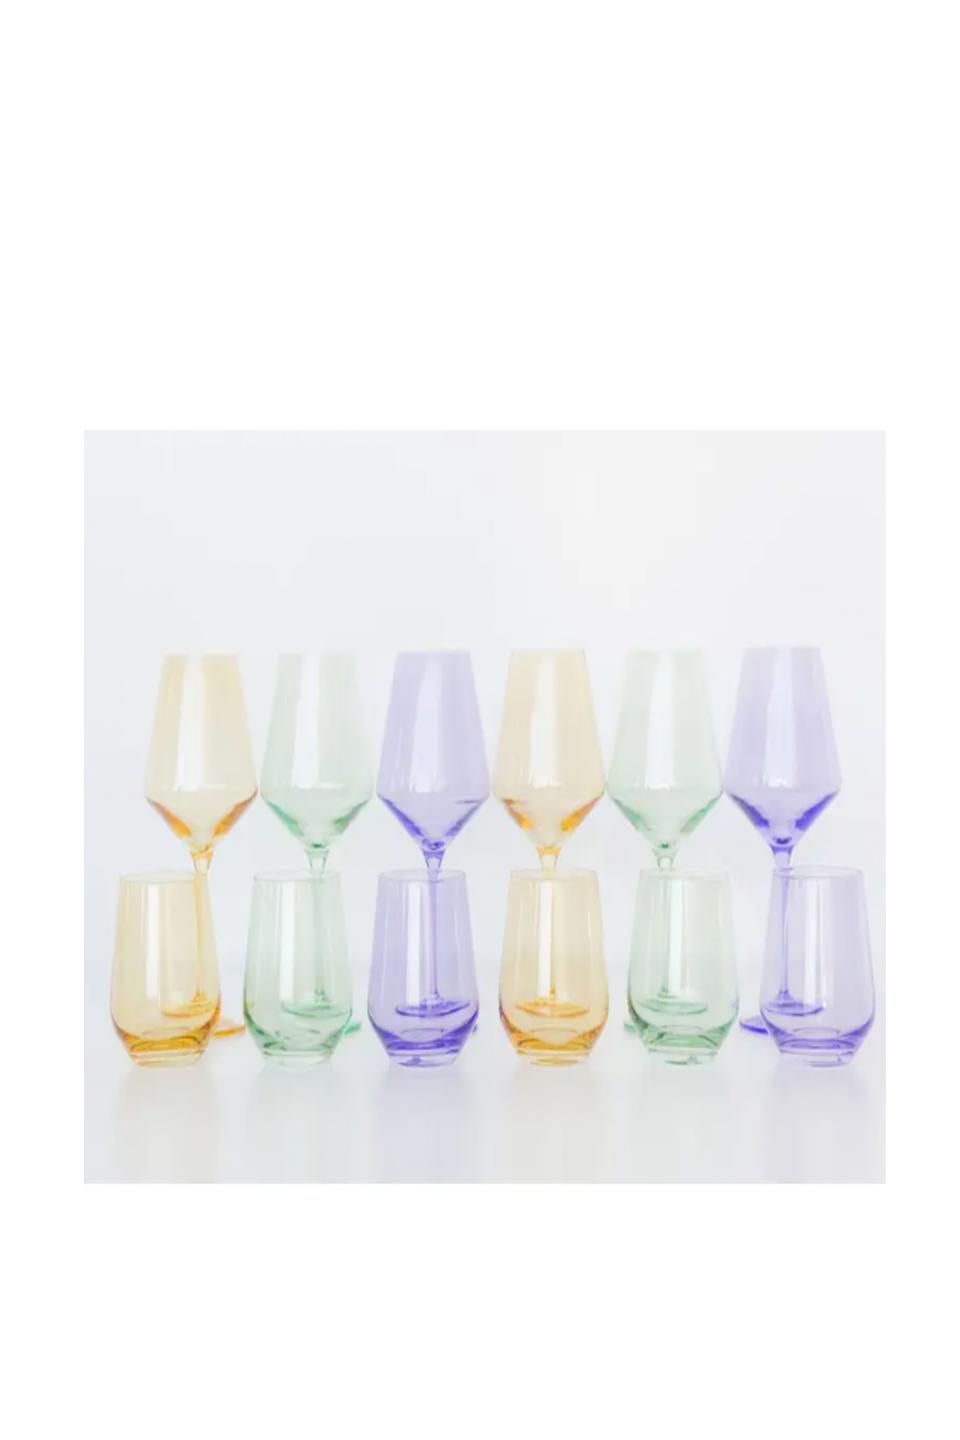 <p><strong>Estelle Colored Glass</strong></p><p>nordstrom.com</p><p><strong>$75.00</strong></p><p><a href="https://go.redirectingat.com?id=74968X1596630&url=https%3A%2F%2Fwww.nordstrom.com%2Fs%2F5964866&sref=https%3A%2F%2Fwww.goodhousekeeping.com%2Fholidays%2Fgift-ideas%2Fg225%2Fhostess-gifts%2F" rel="nofollow noopener" target="_blank" data-ylk="slk:Shop Now" class="link ">Shop Now</a></p><p>Every good hostess deserves a special set of wine glasses. These stemless hand-blown tumblers come in a slew of colors — 15 to be exact — that will instantly add vintage style to their tabletop. </p>